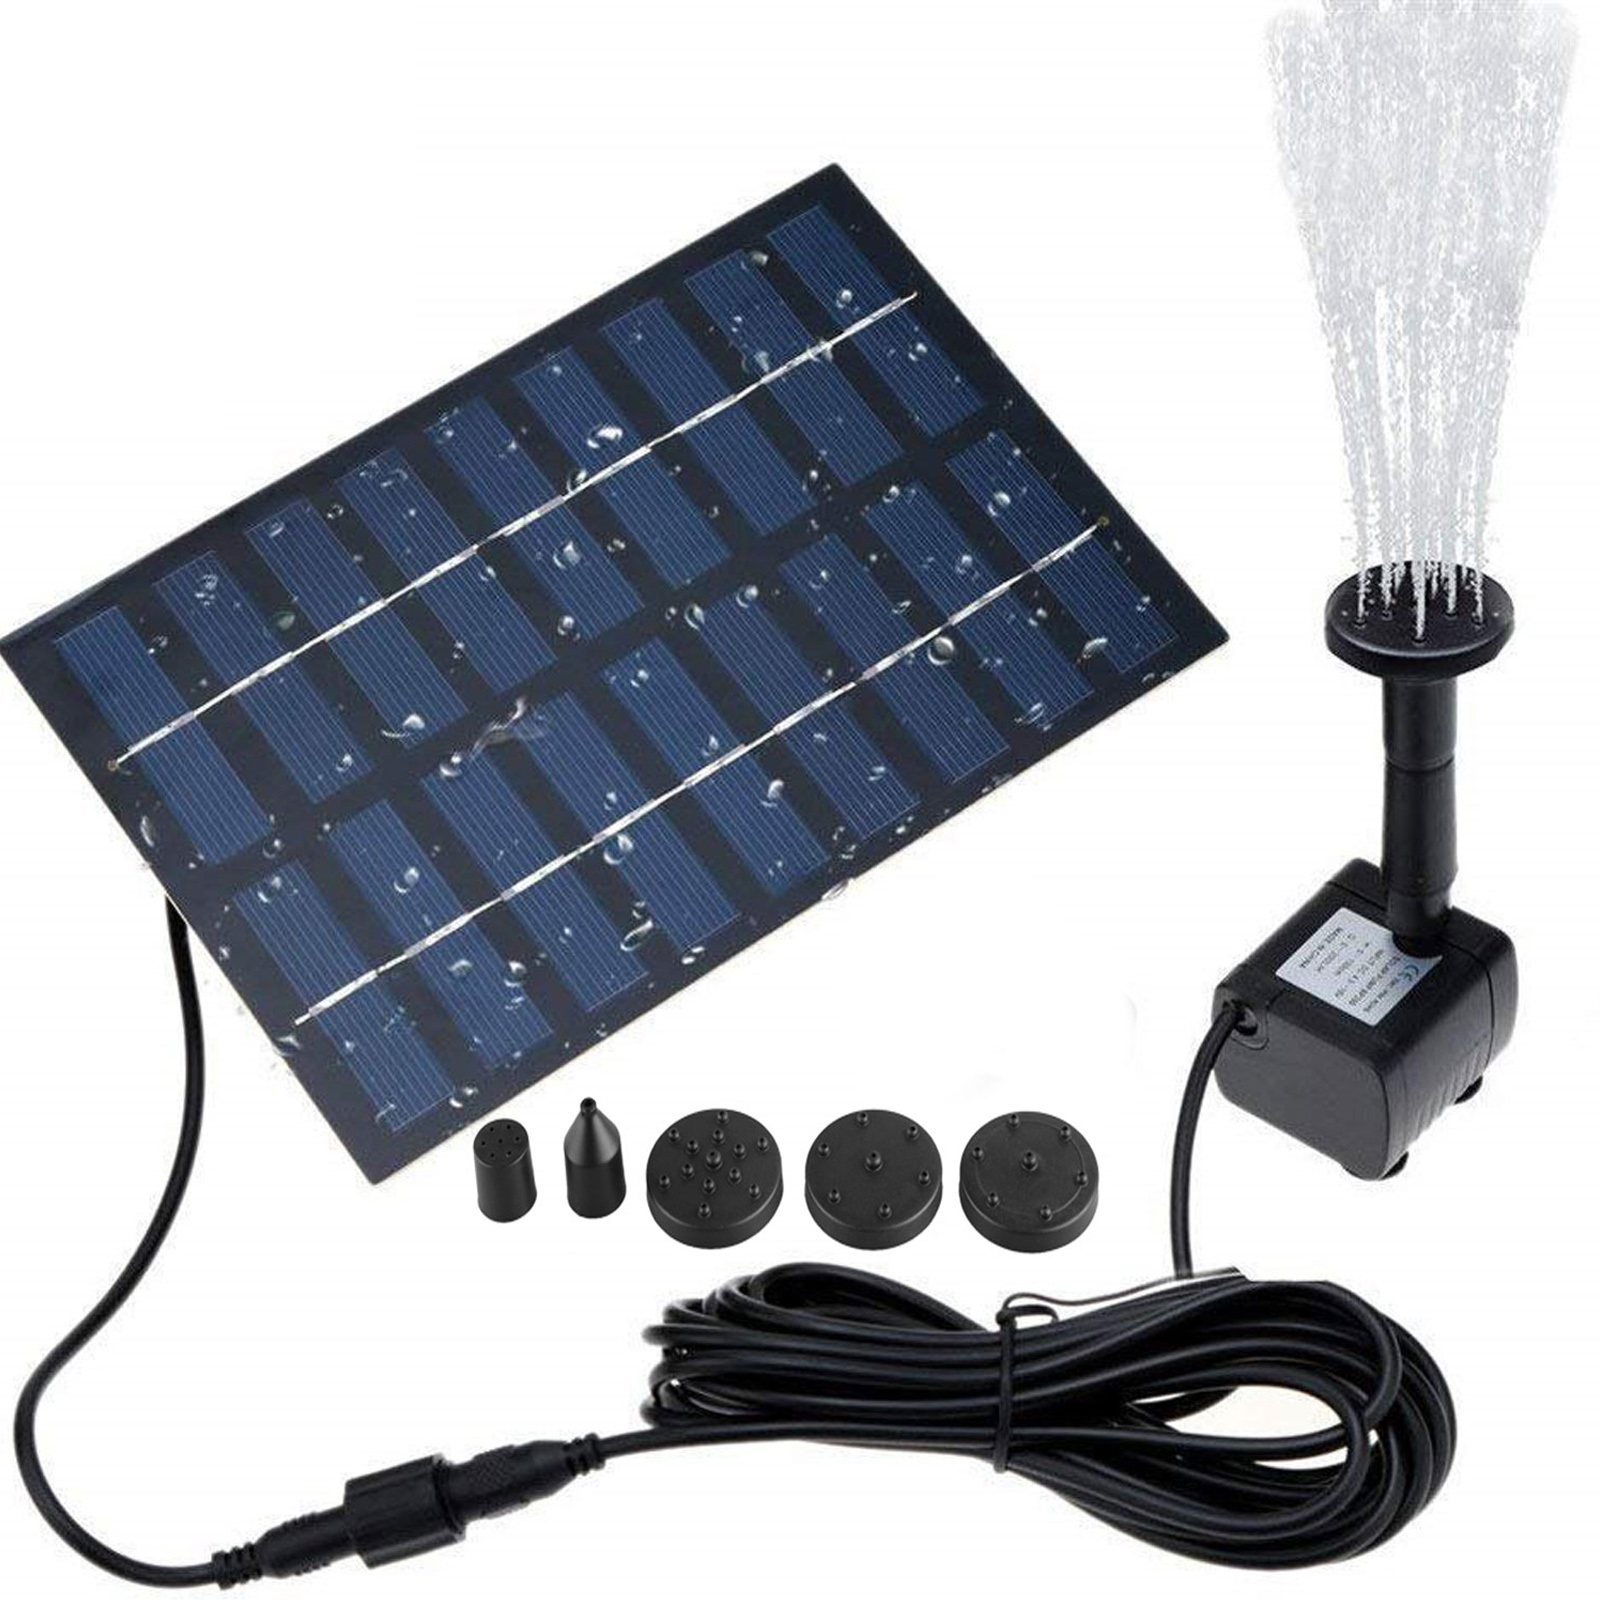 EEEkit 1.2W Solar Fountain, Submersible Water Pump for Bird Bath, Solar Panel Kit for Outdoor Pond, Patio, Garden, 4 Types Sprinkler Heads with Different Water Flows and Water Heights - image 1 of 10